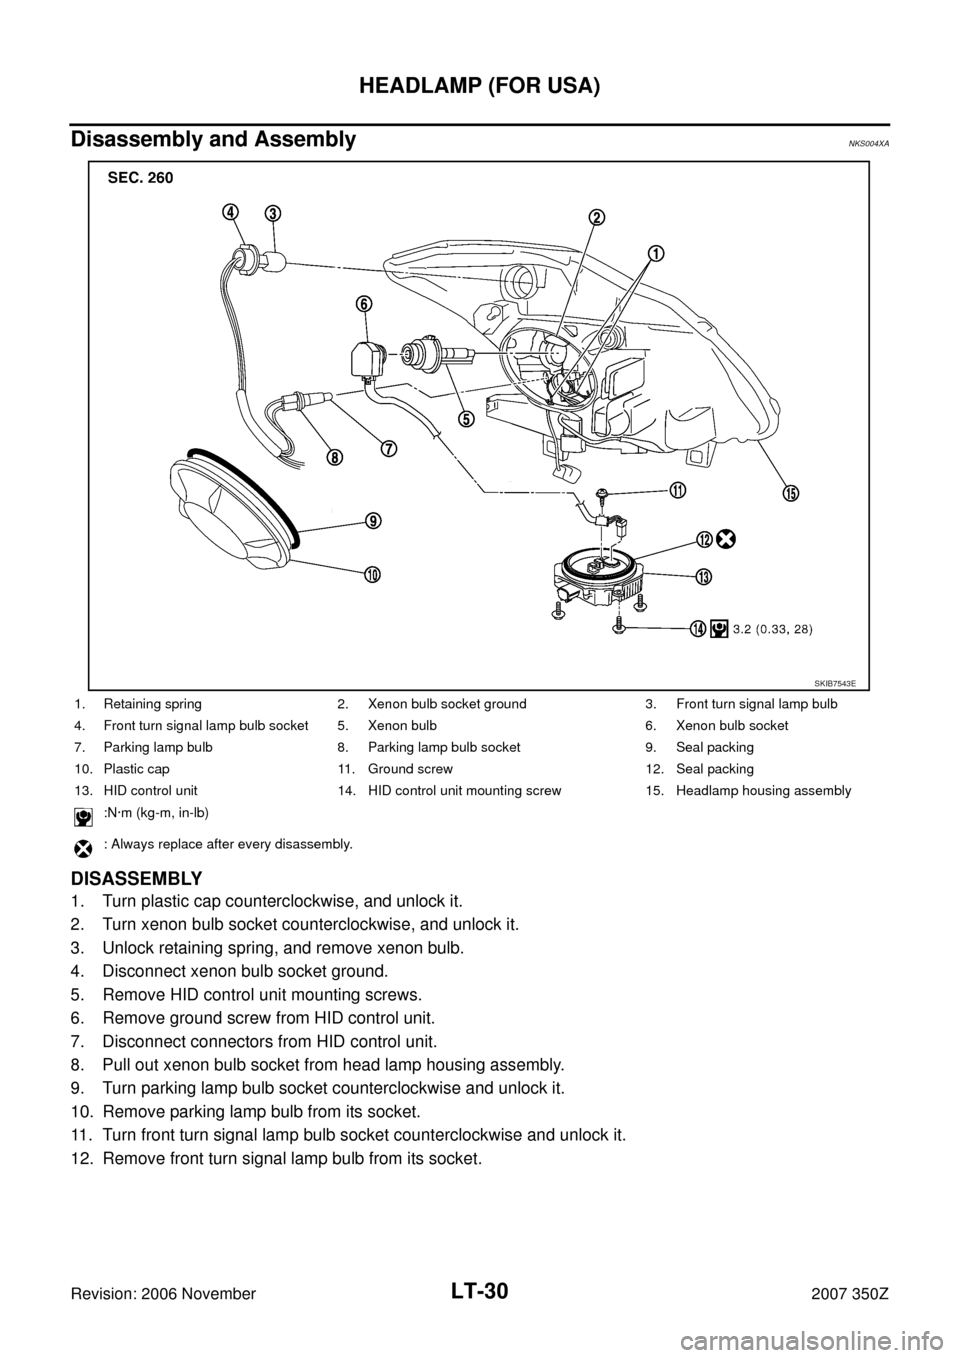 NISSAN 350Z 2007 Z33 Lighting System Owners Manual LT-30
HEADLAMP (FOR USA)
Revision: 2006 November2007 350Z
Disassembly and Assembly NKS004XA
DISASSEMBLY
1. Turn plastic cap counterclockwise, and unlock it.
2. Turn xenon bulb socket counterclockwise,